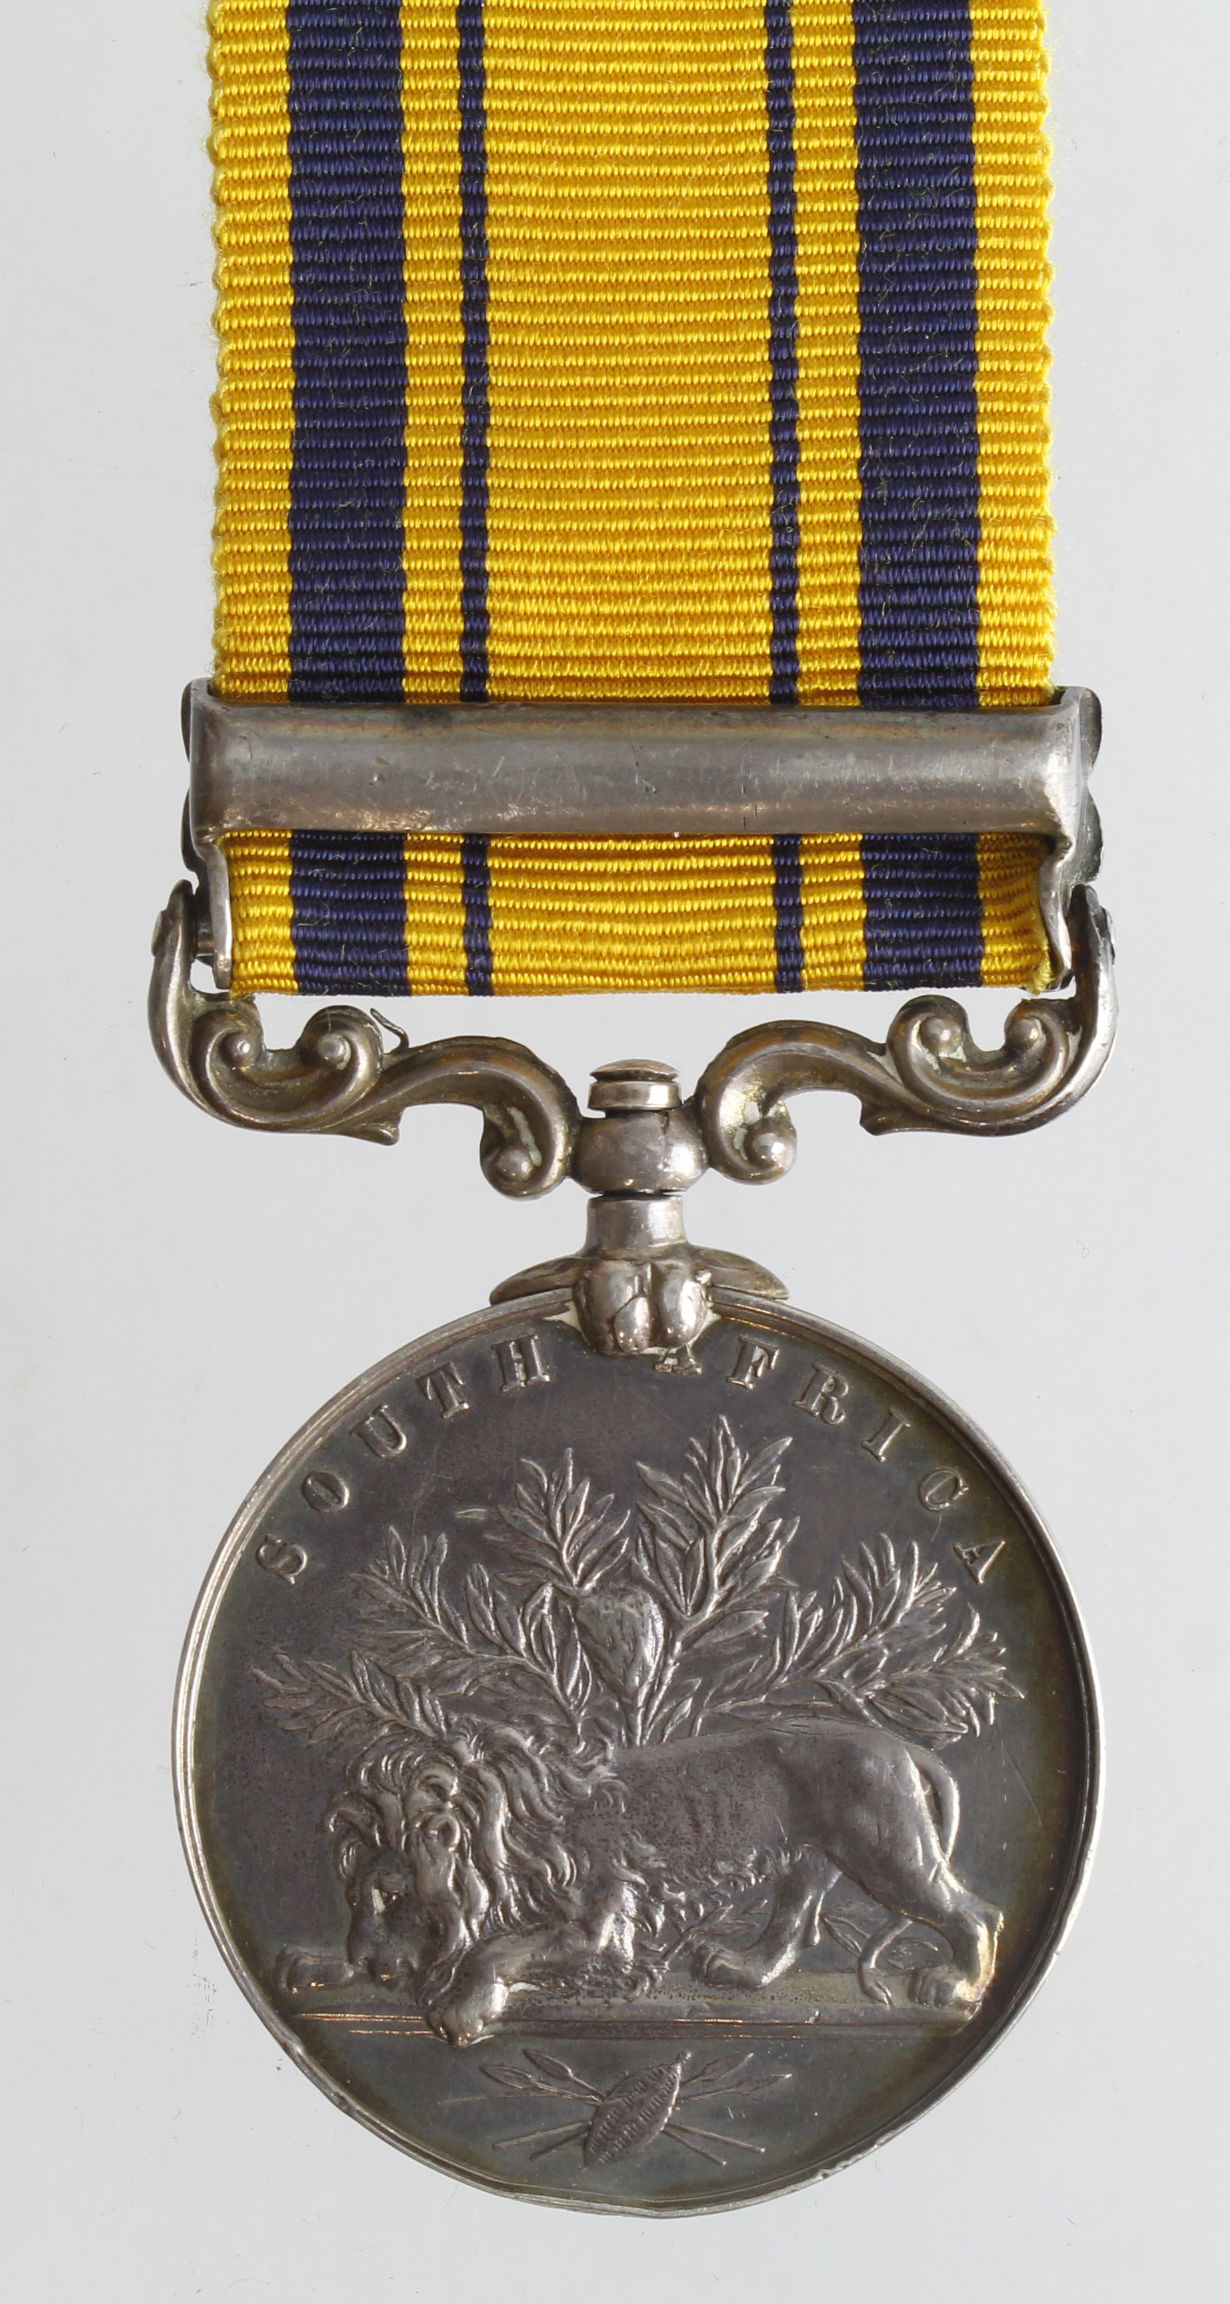 South Africa Medal with 1879 clasp (76 Pte F Ashby 57th Foot) renamed. Sold as seen - Bild 2 aus 2